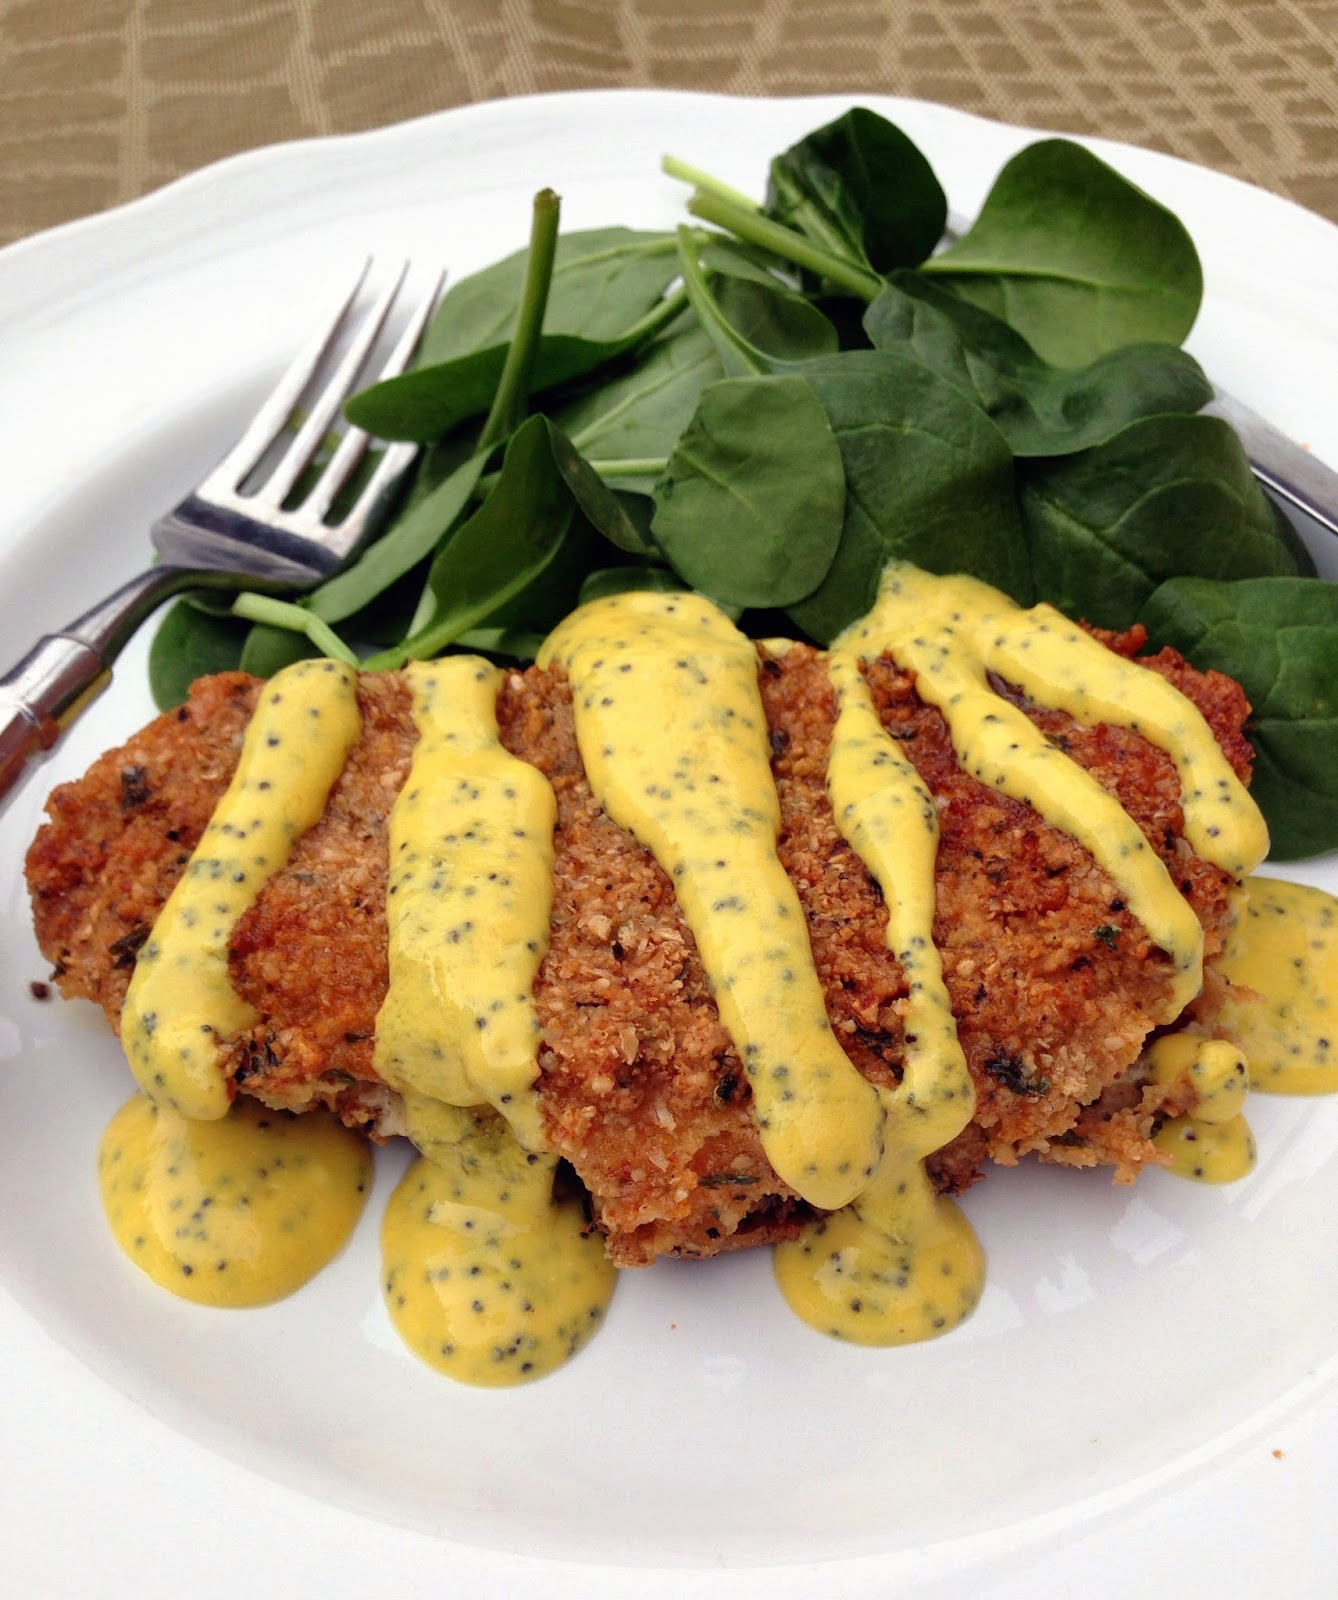 Is Fried Chicken Healthy
 taylor made healthy pan "fried" chicken with poppyseed